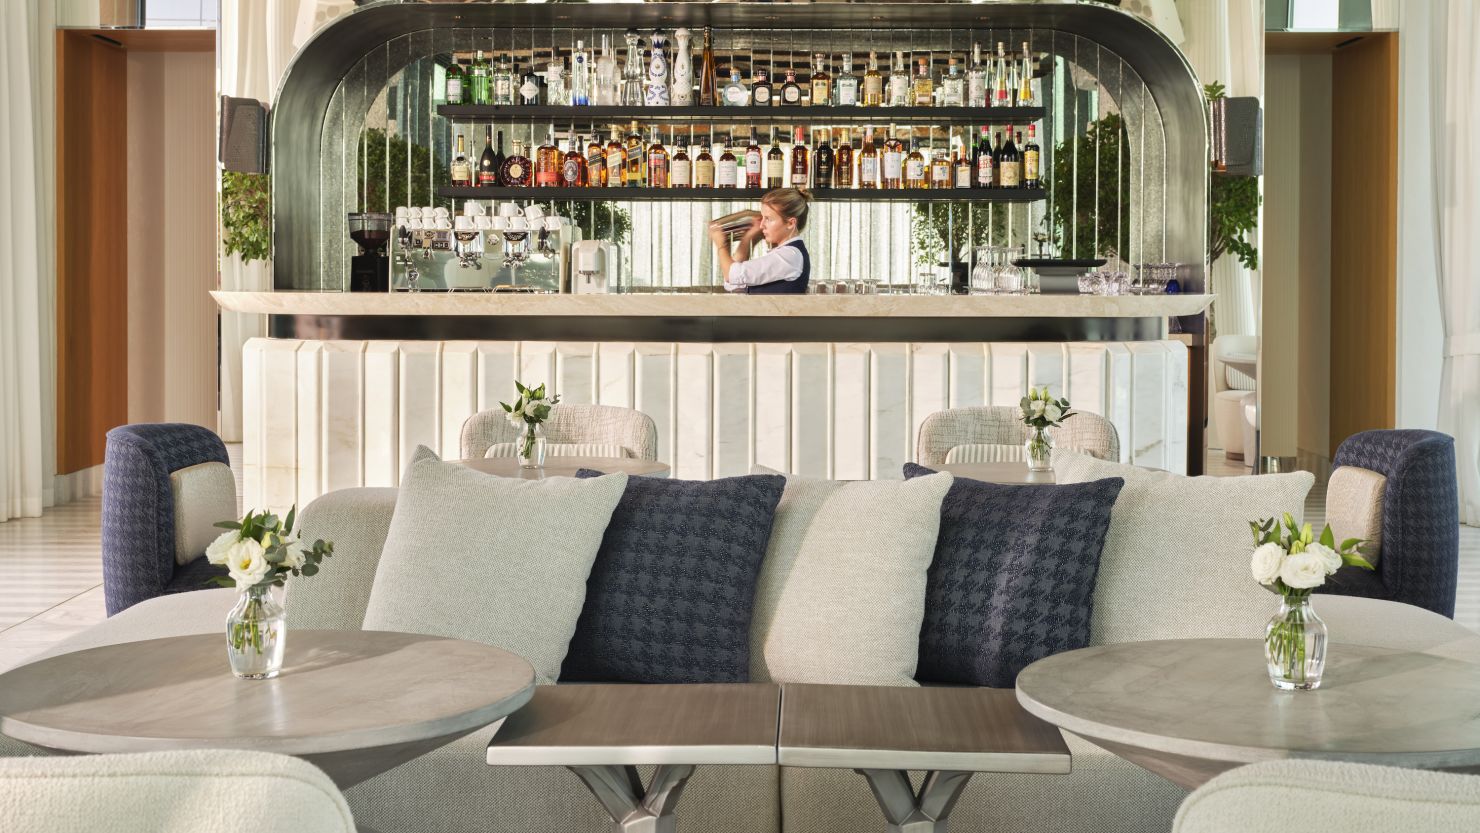 High Society, the new champagne bar at The Lana, a Dorchester Collection hotel